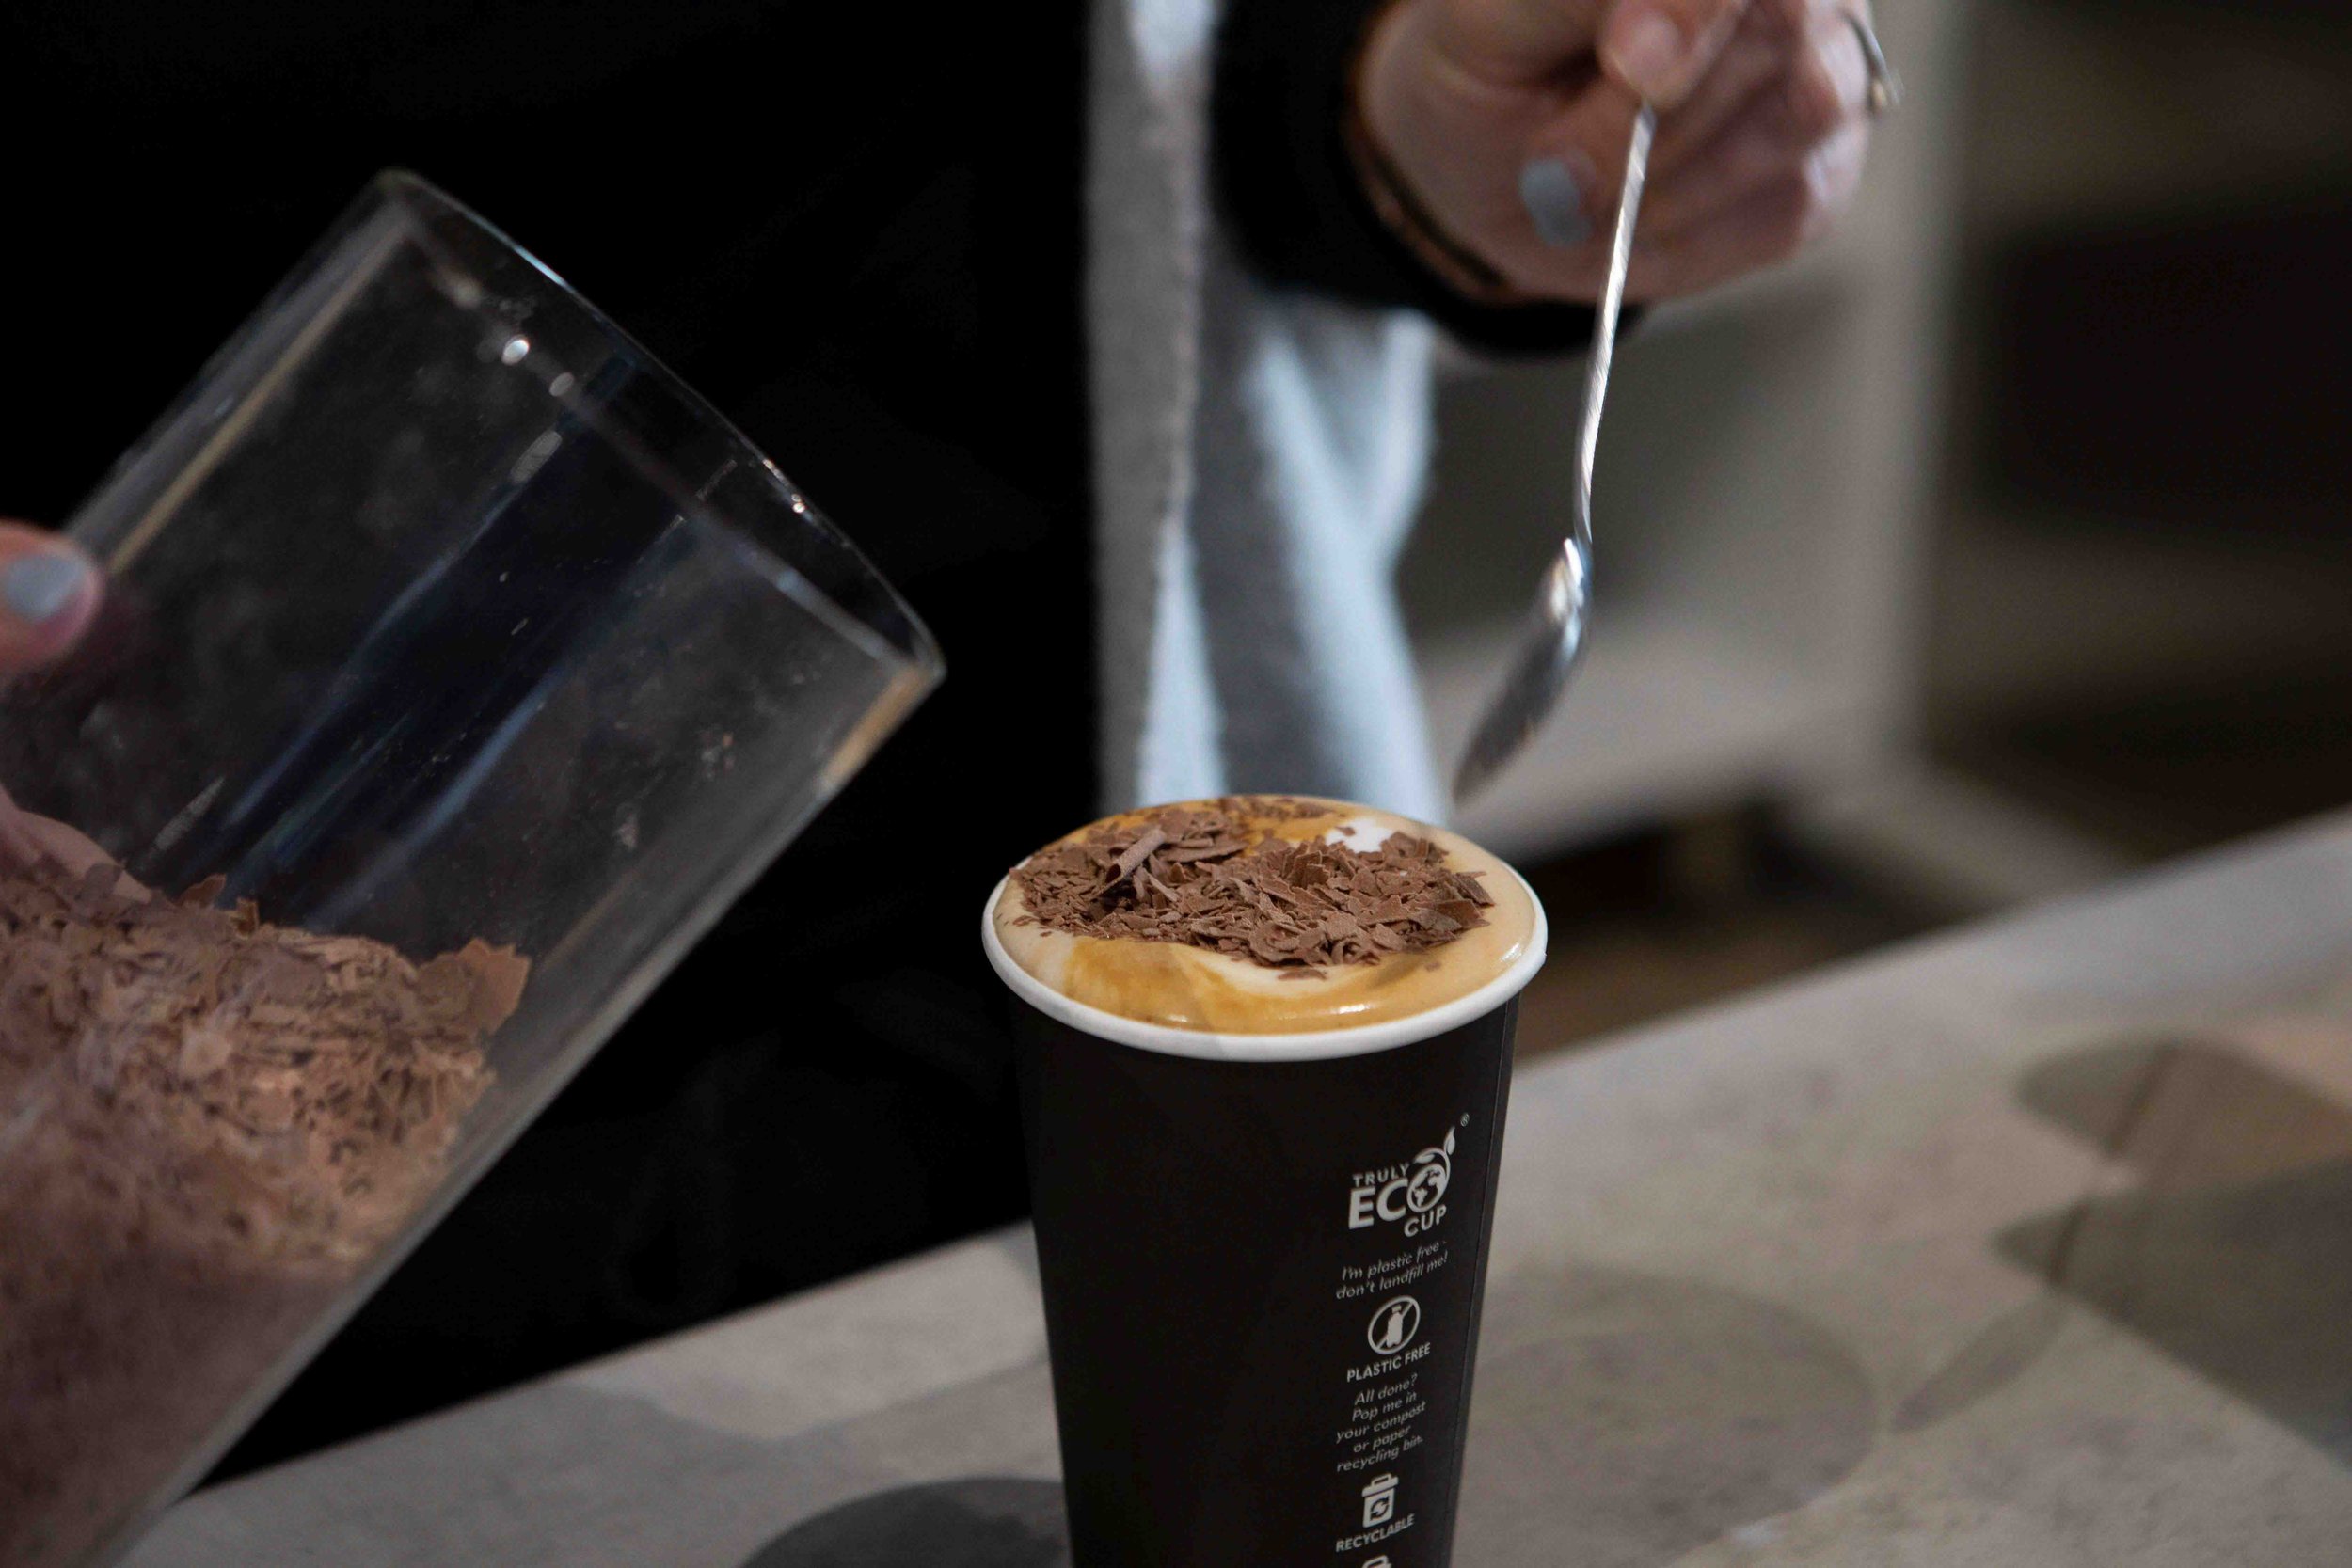 Chocolate being place on top of a cappuccino in a takeaway cup